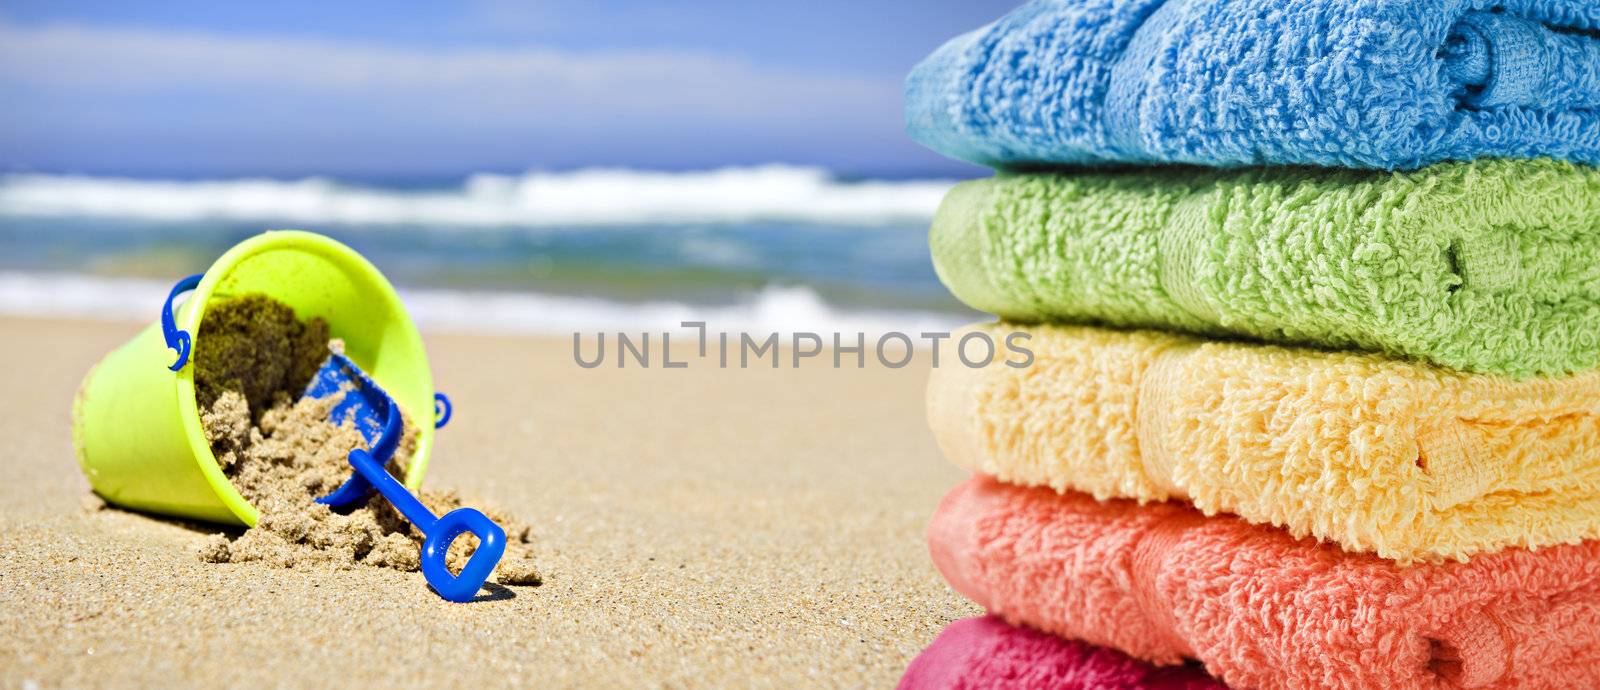 Colorful towels on a beach with toy bucket and spade by tish1